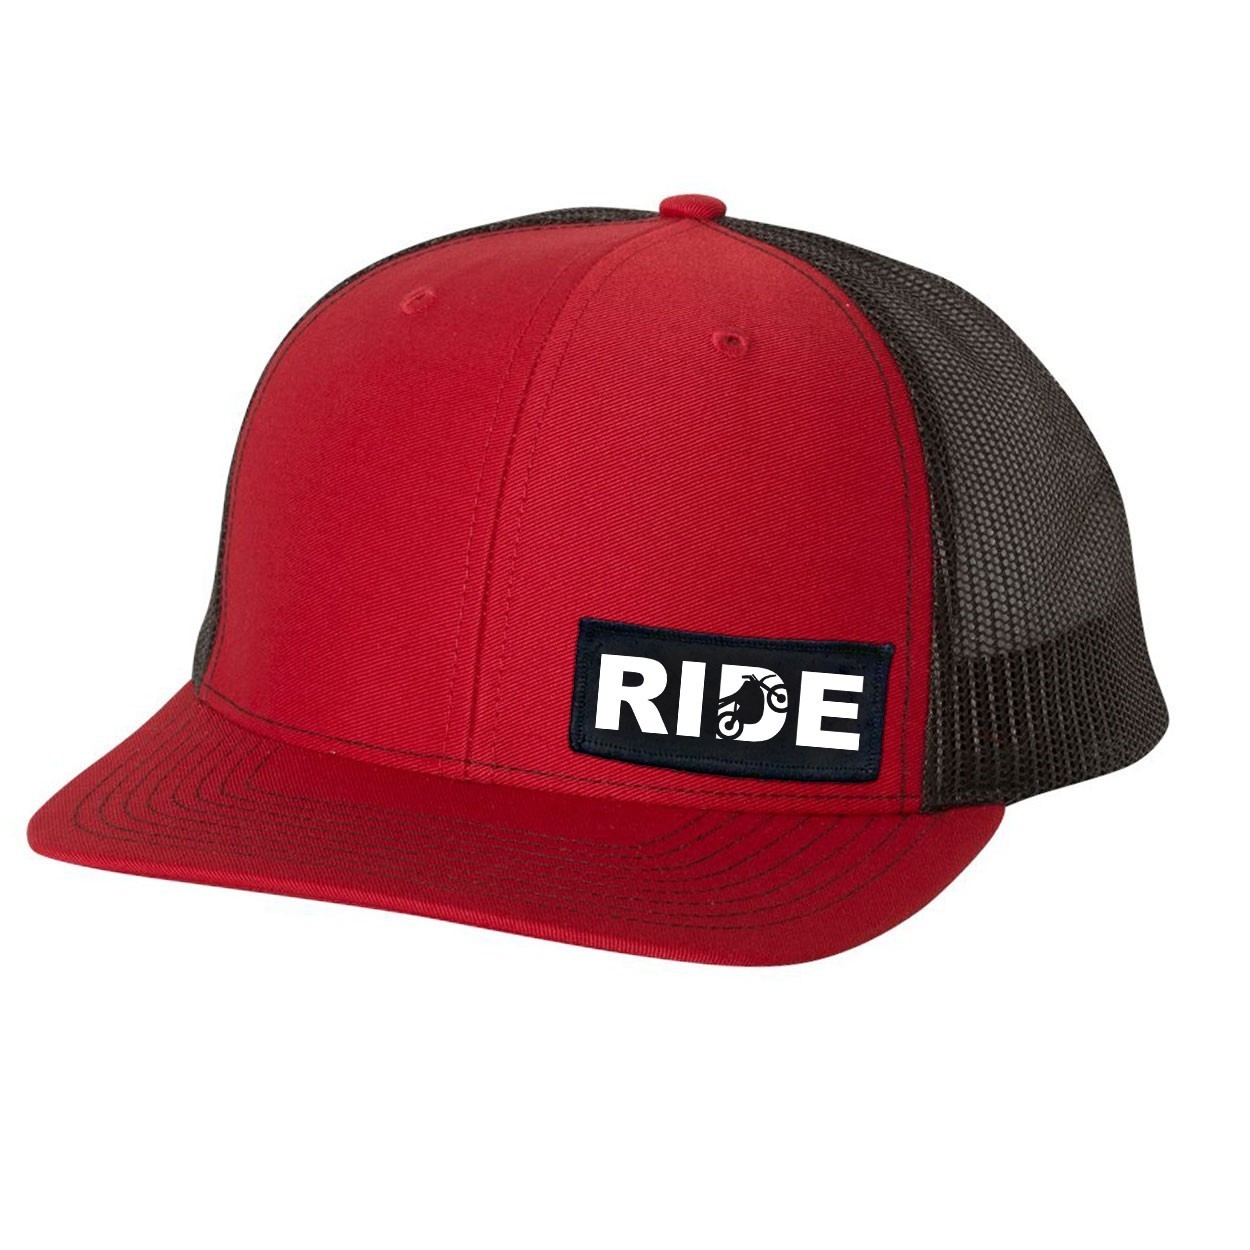 Ride Moto Logo Night Out Woven Patch Snapback Trucker Hat Red/Black (White Logo)